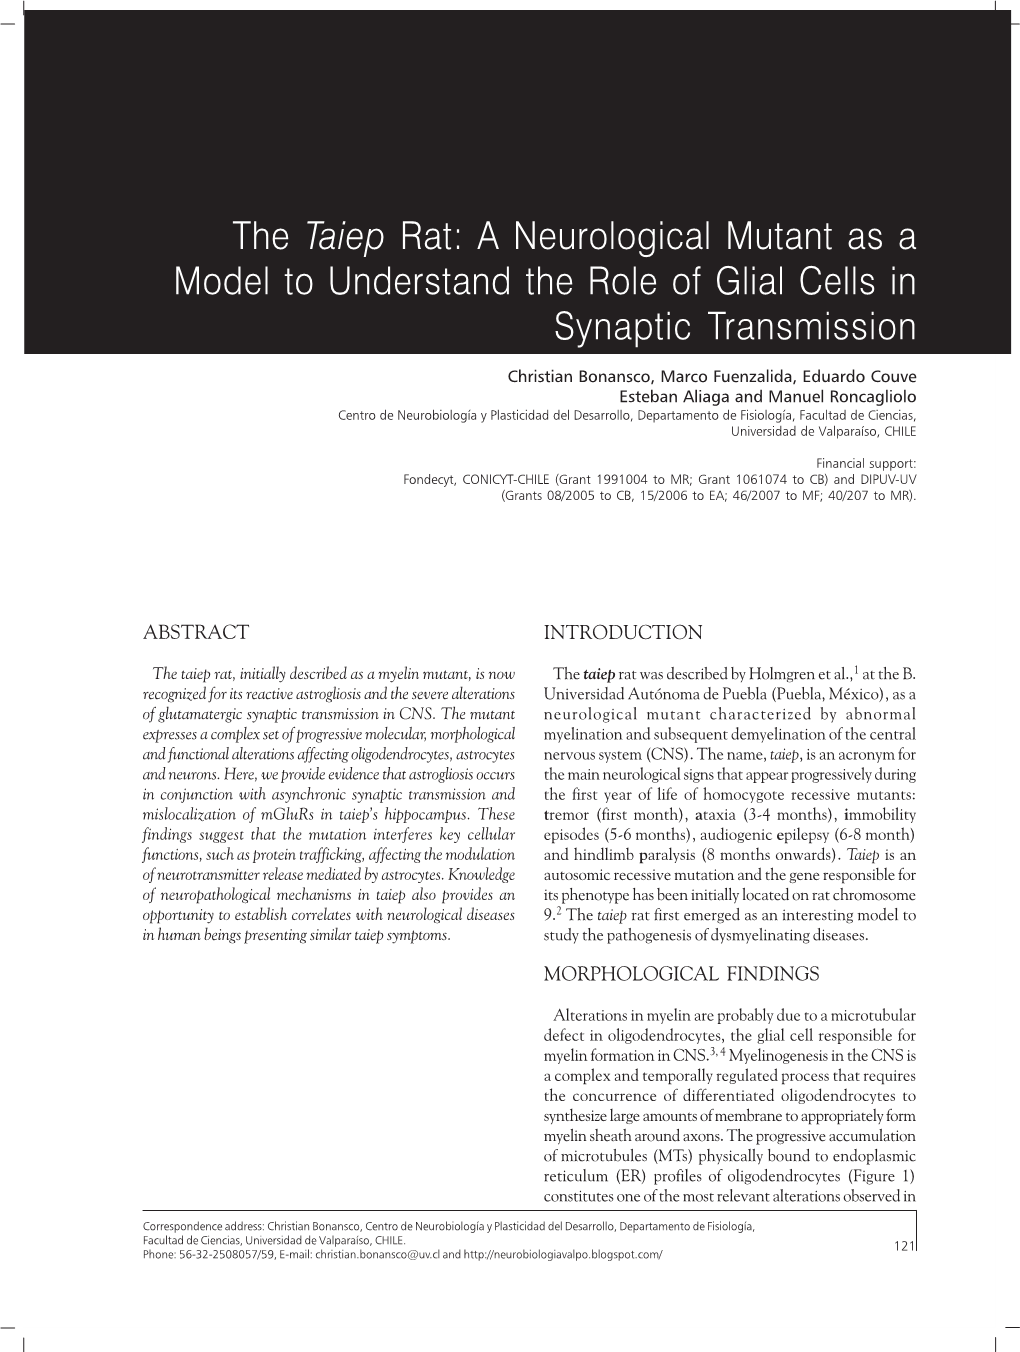 The Taiep Rat: a Neurological Mutant As a Model to Understand the Role of Glial Cells in Synaptic Transmission